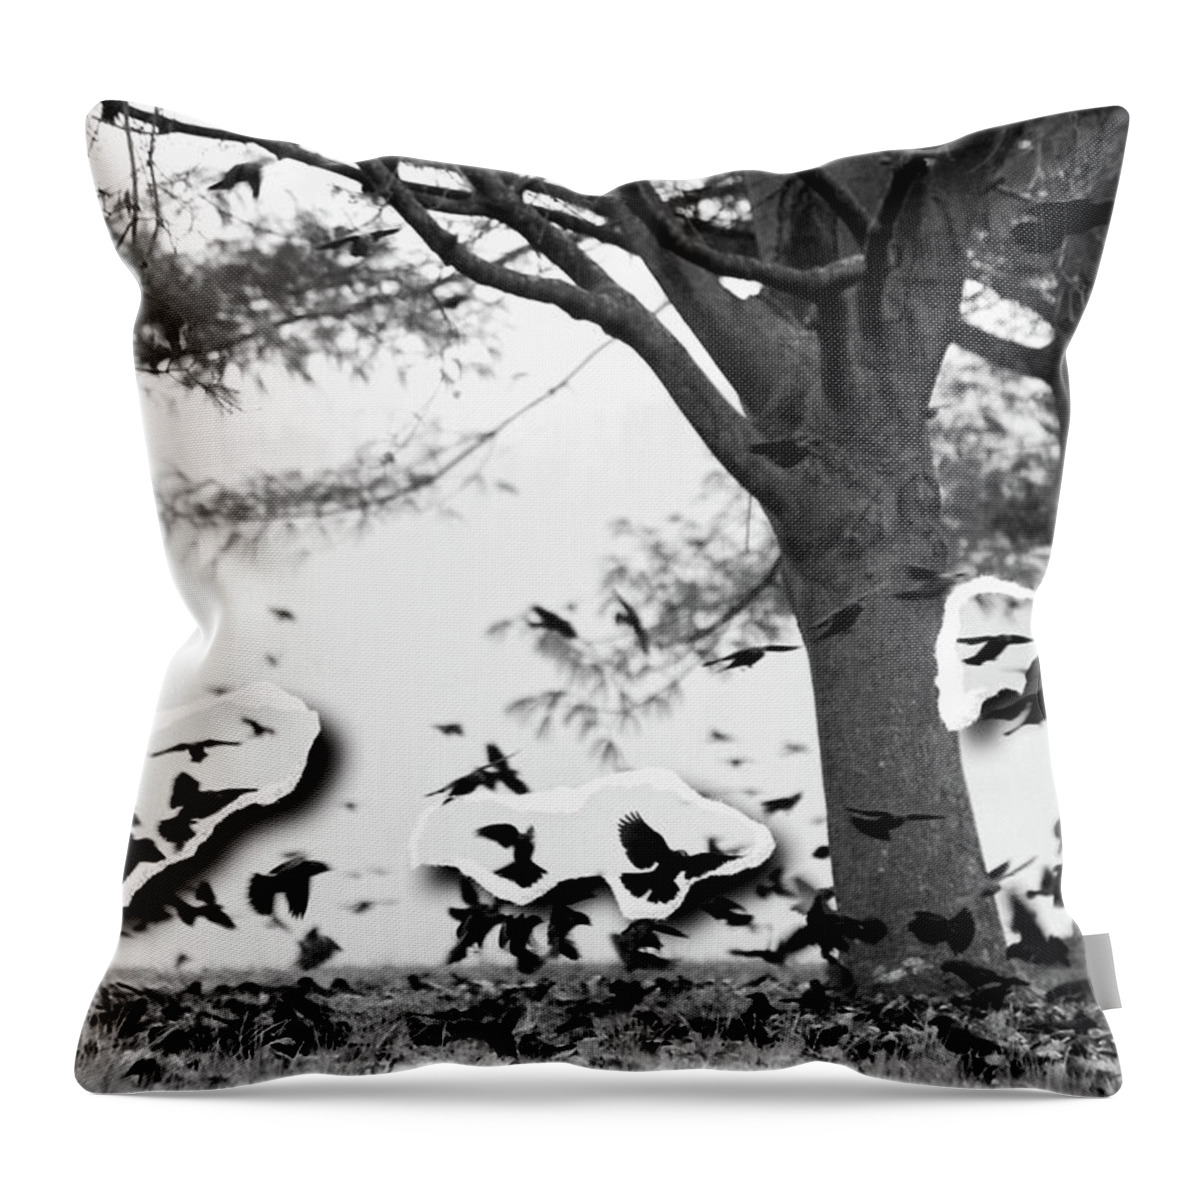 Surrealist Migrating Birds Throw Pillow featuring the photograph While I Pondered by Susan Maxwell Schmidt